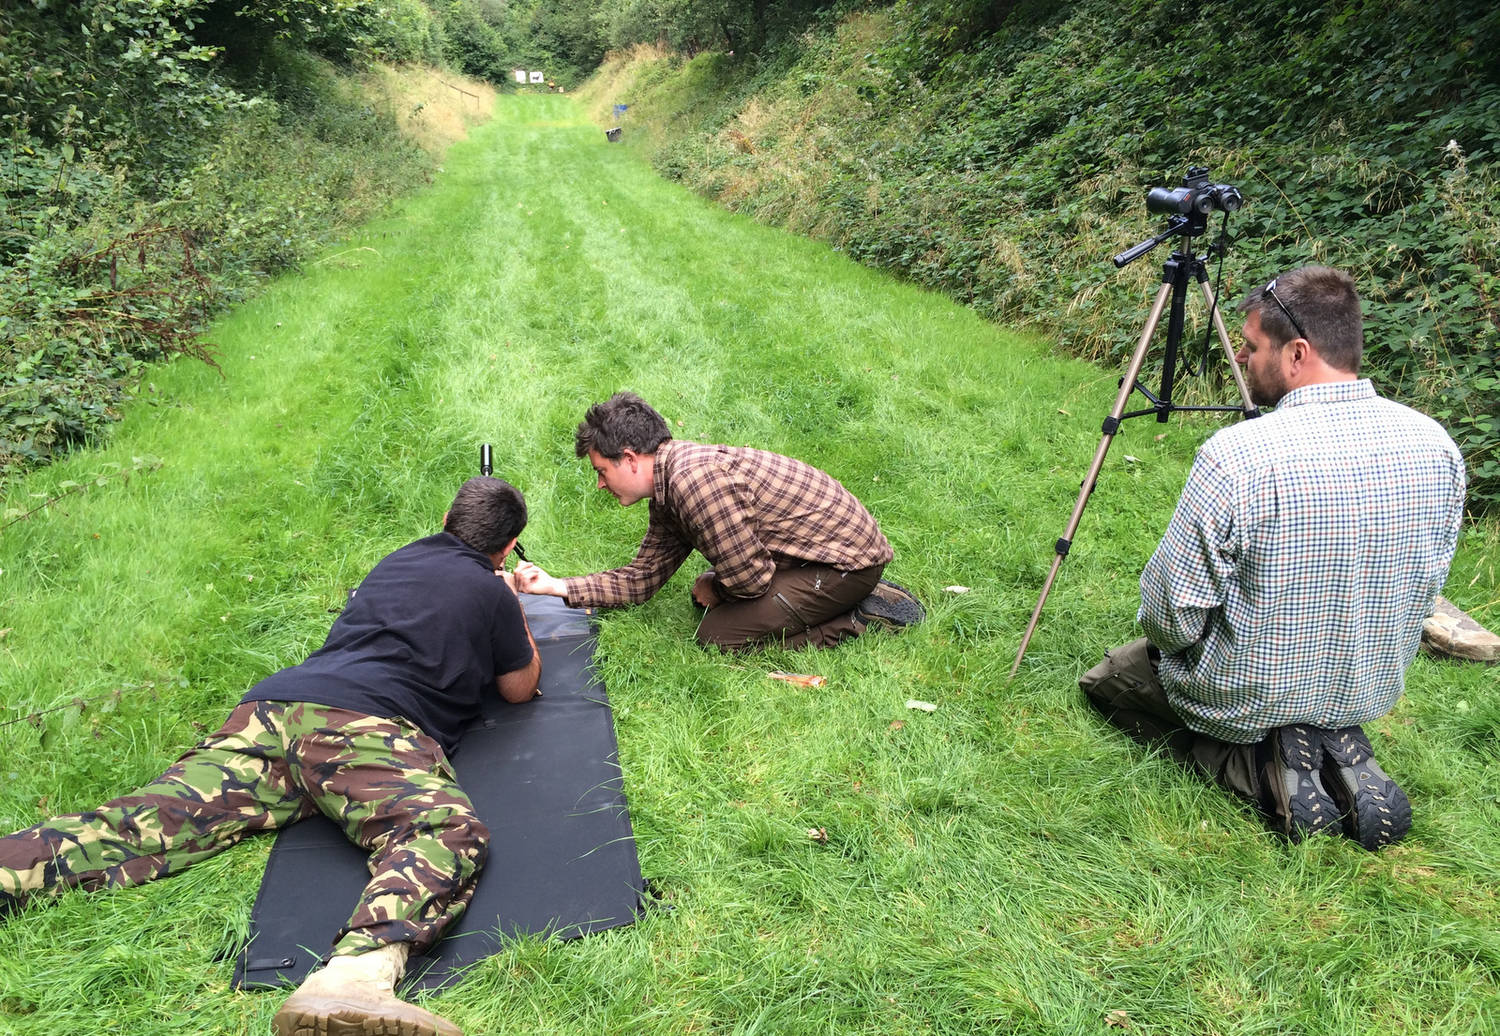 A photograph of three men hunting outdoors